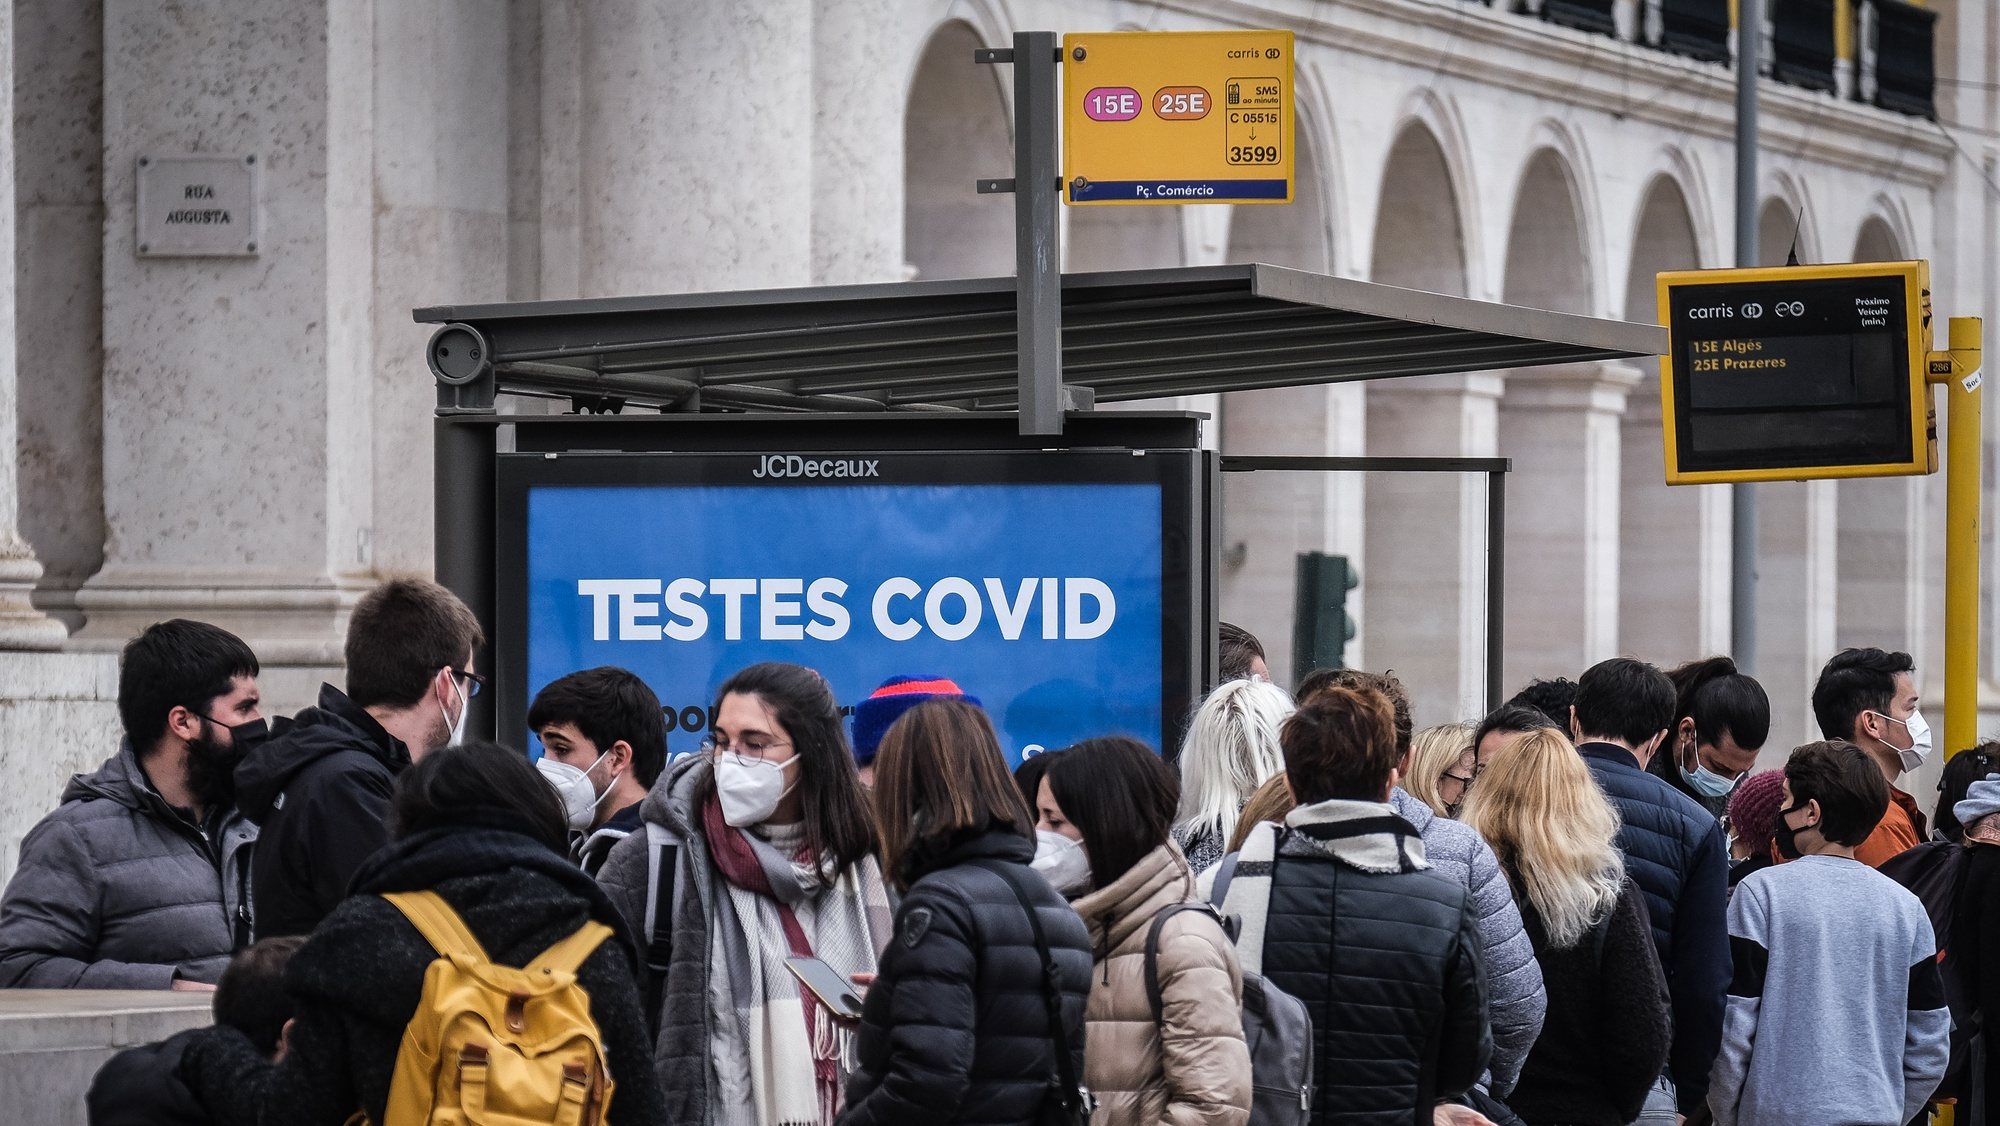 People waiting for a bus next to a sign advertising covid testing in Lisbon, Portugal, 30 December 2021. Yesterday, Portugal registered 26,867 new covid-19 infections, a new high since the start of the pandemic. Due to the surge of positive cases and the rise of the Omicron variant Portugal&#039;s government decided to implement restrictive measures such as closing schools, bars and clubs. MARIO CRUZ/LUSA